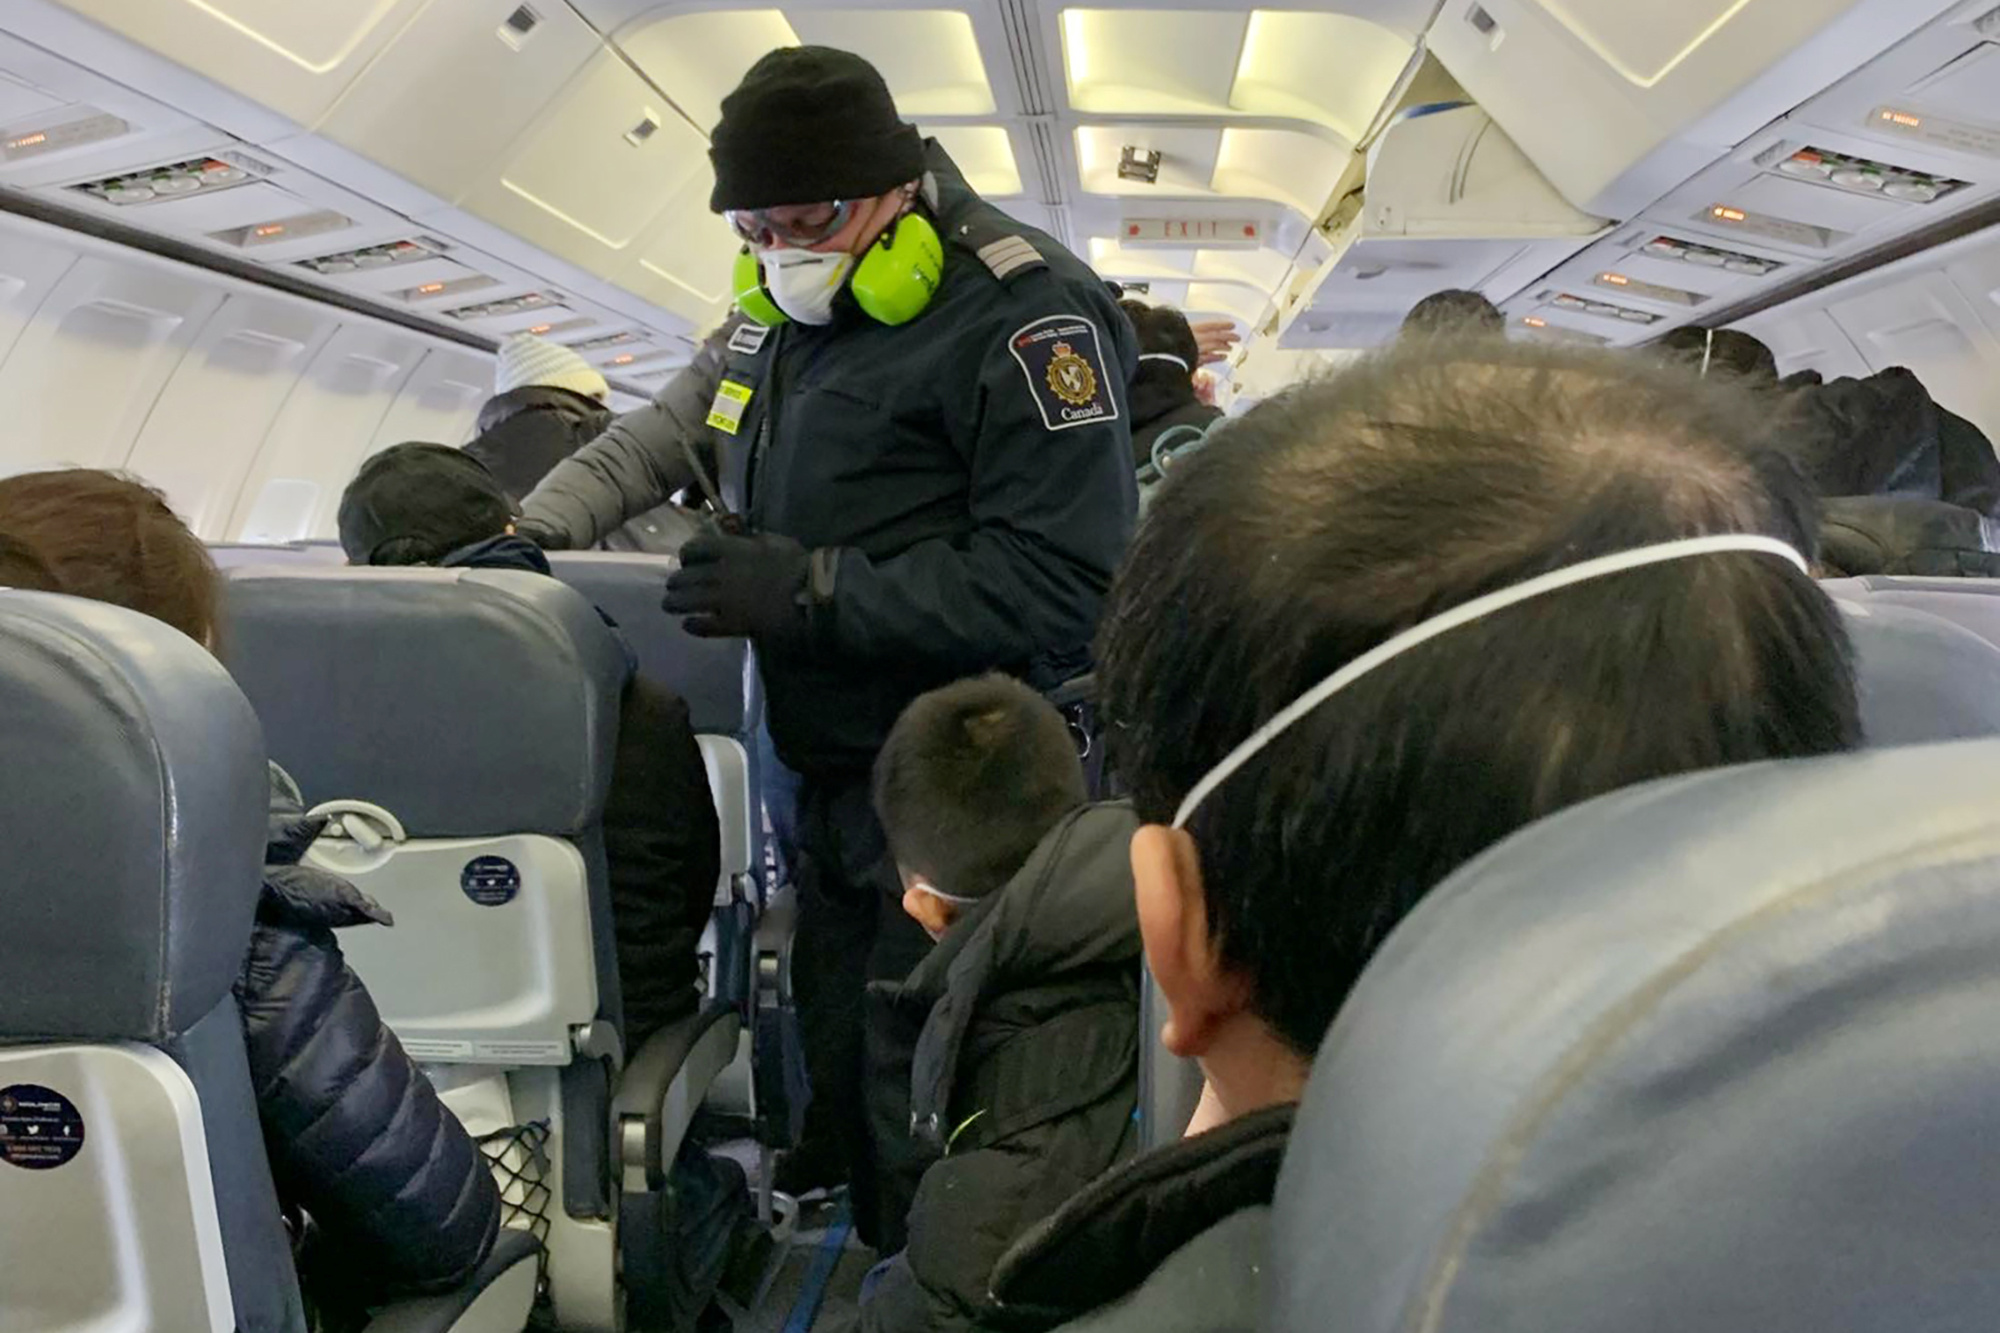 A Royal Canadian Mounted Police officer checks citizens being flown to Canadian Forces Base Trenton in Ontario on Friday after they were evacuated from China. | COURTESY OF EDWARD WANG / VIA REUTERS